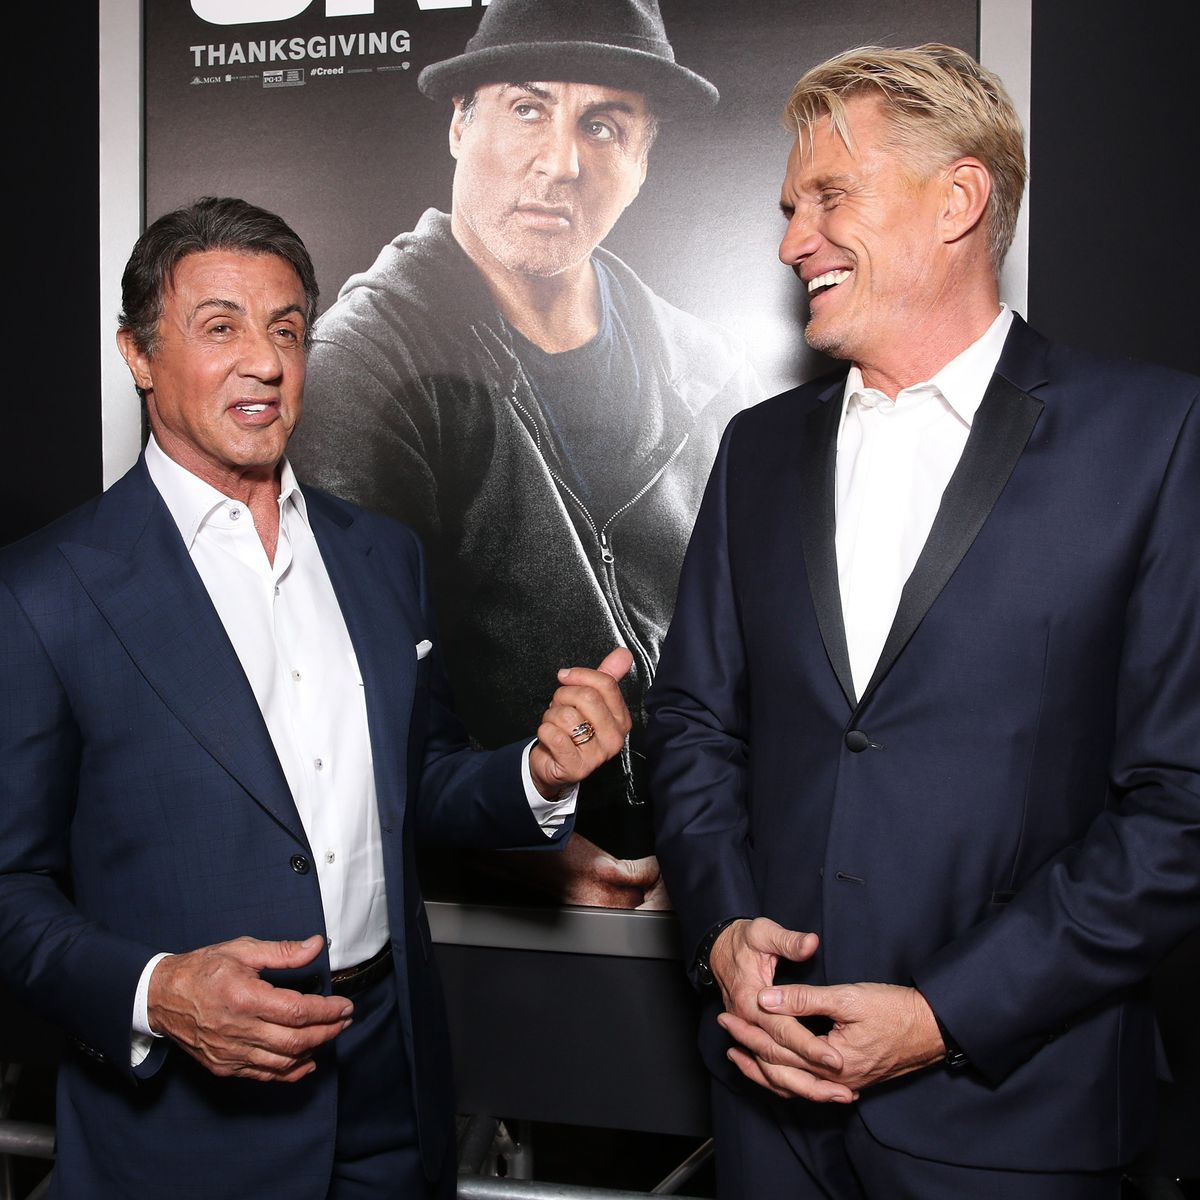 Creek gloss essence Sylvester Stallone and Dolph Lundgren Are Reuniting for a TV Show